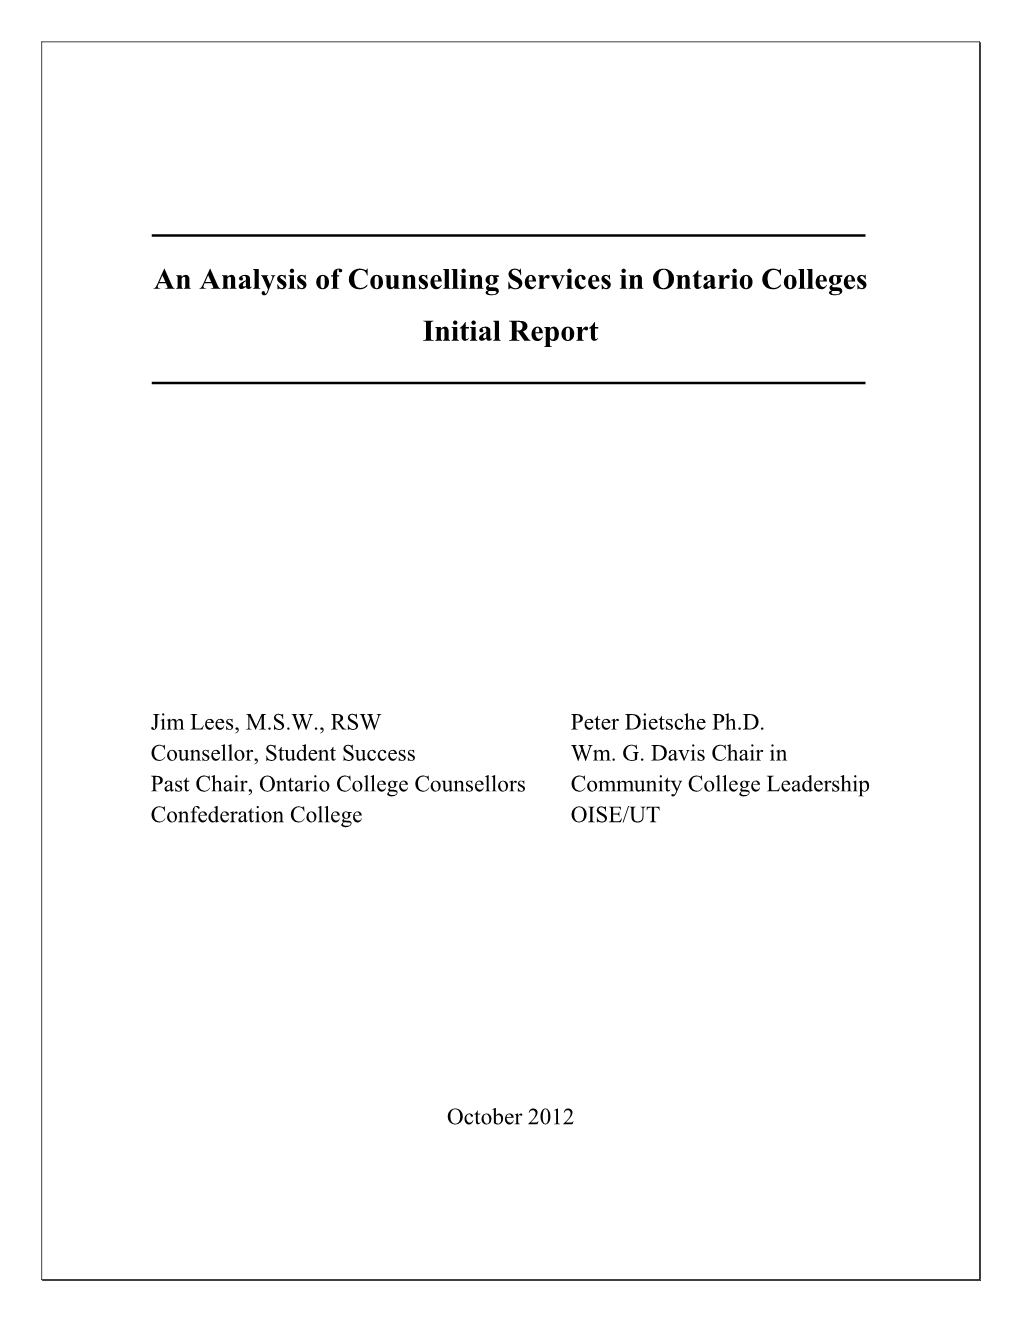 An Analysis of Counselling Services in Ontario Colleges Initial Report